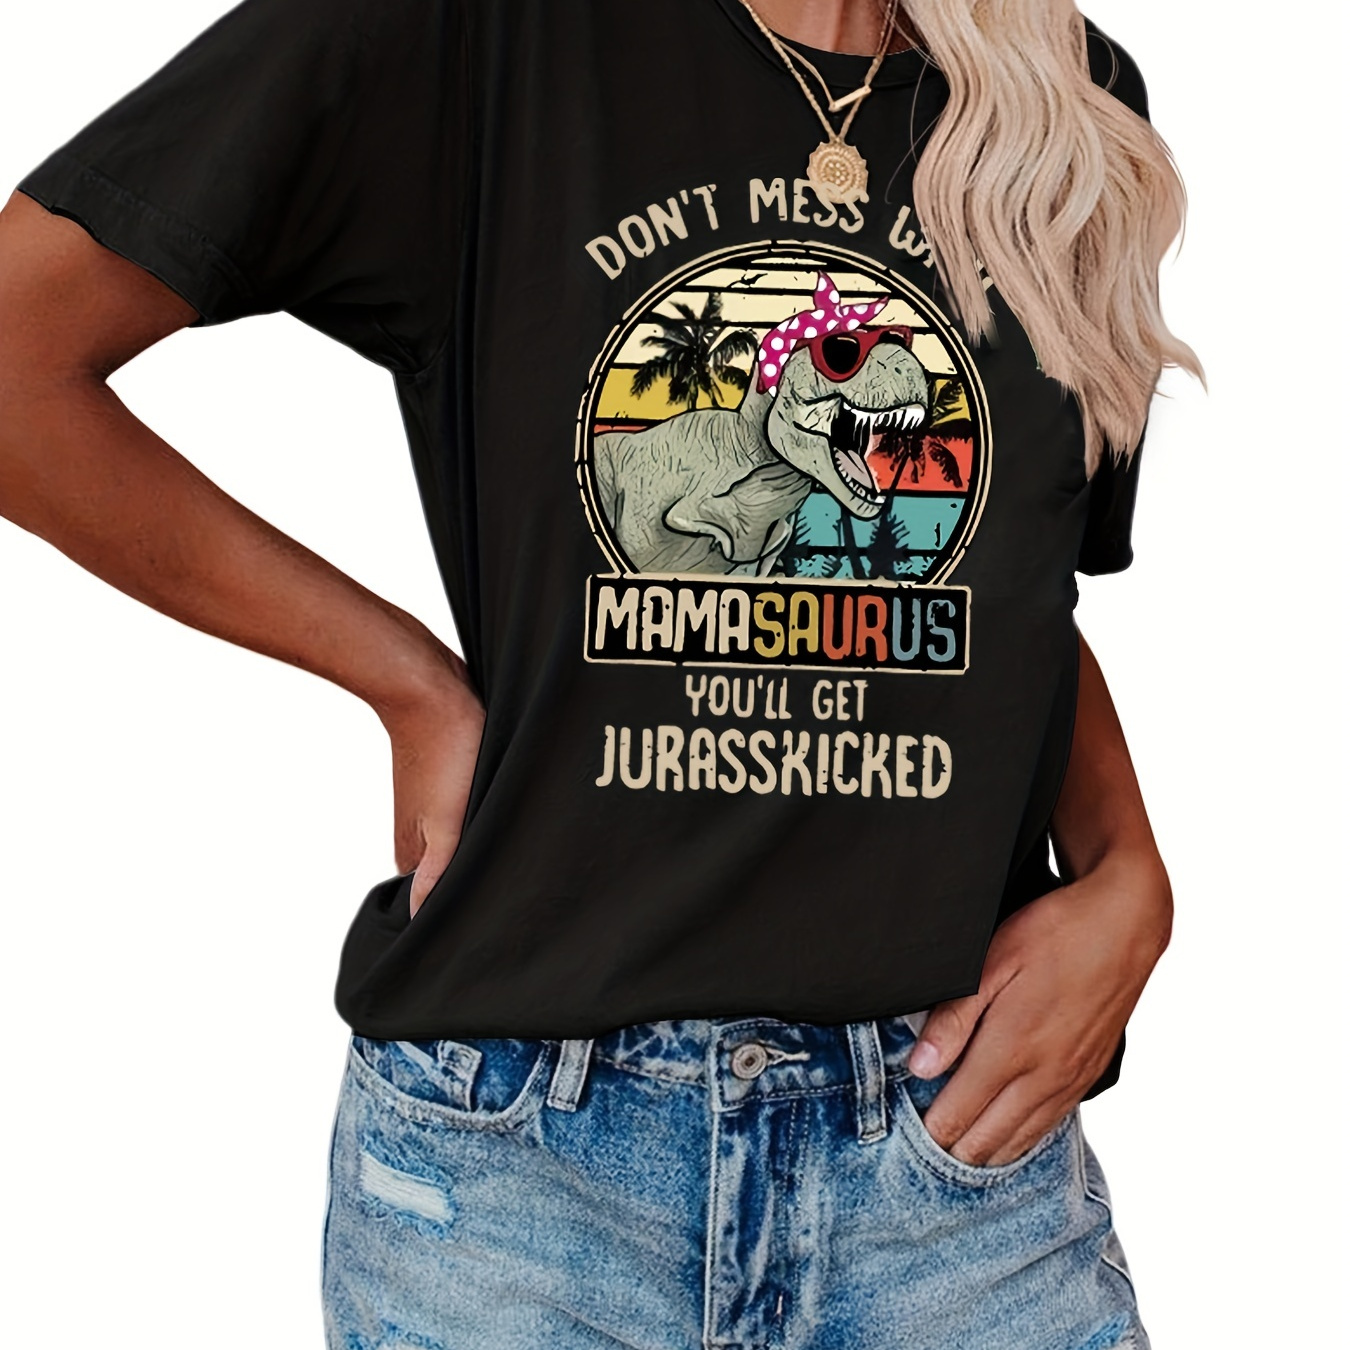 

Mamasaurus Print T-shirt, Short Sleeve Crew Neck Casual Top For Summer & Spring, Women's Clothing